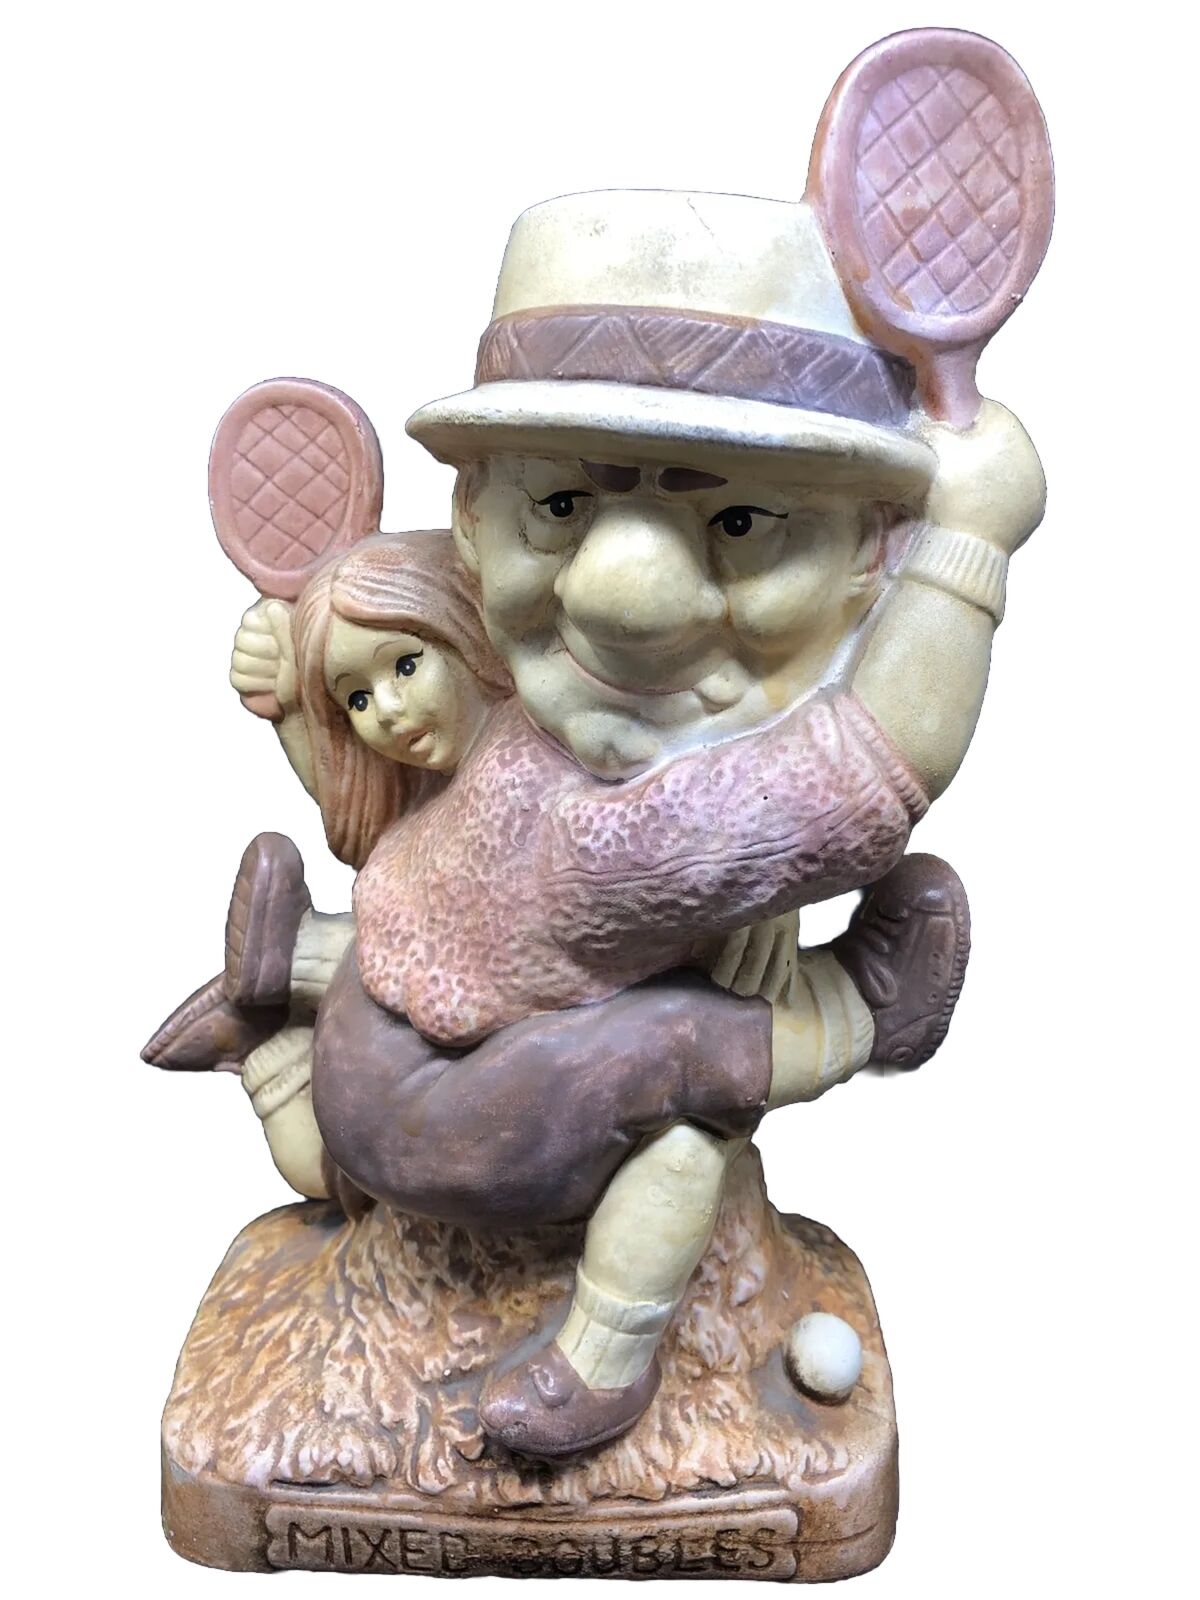 Vintage 1974 ALBERT PRICE Statue Bank MIXED DOUBLES Naughty Tennis Sexy